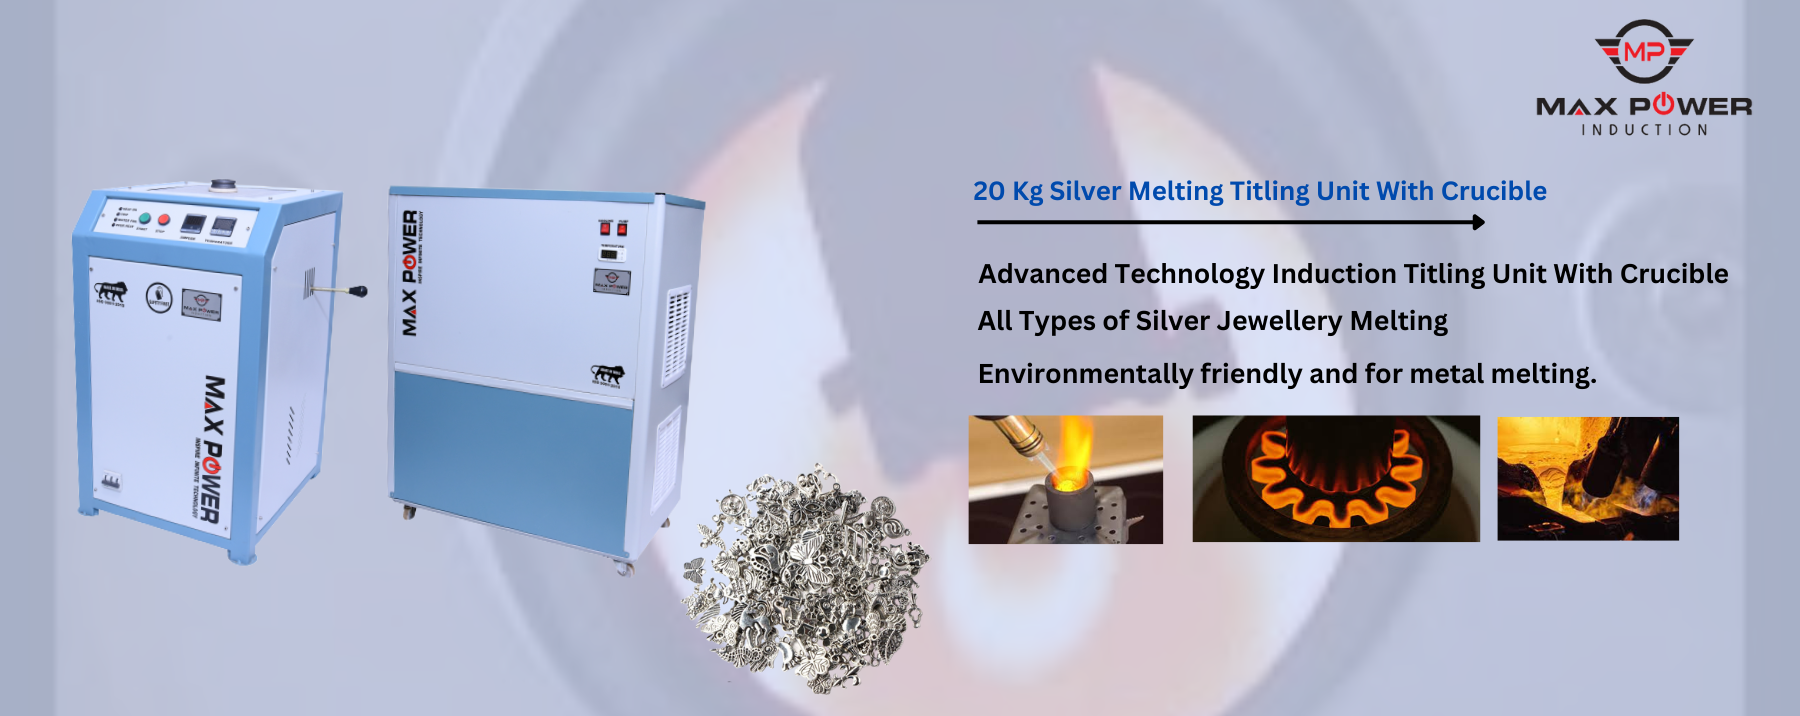 20 Kg Silver Melting Titling Unit With Crucible